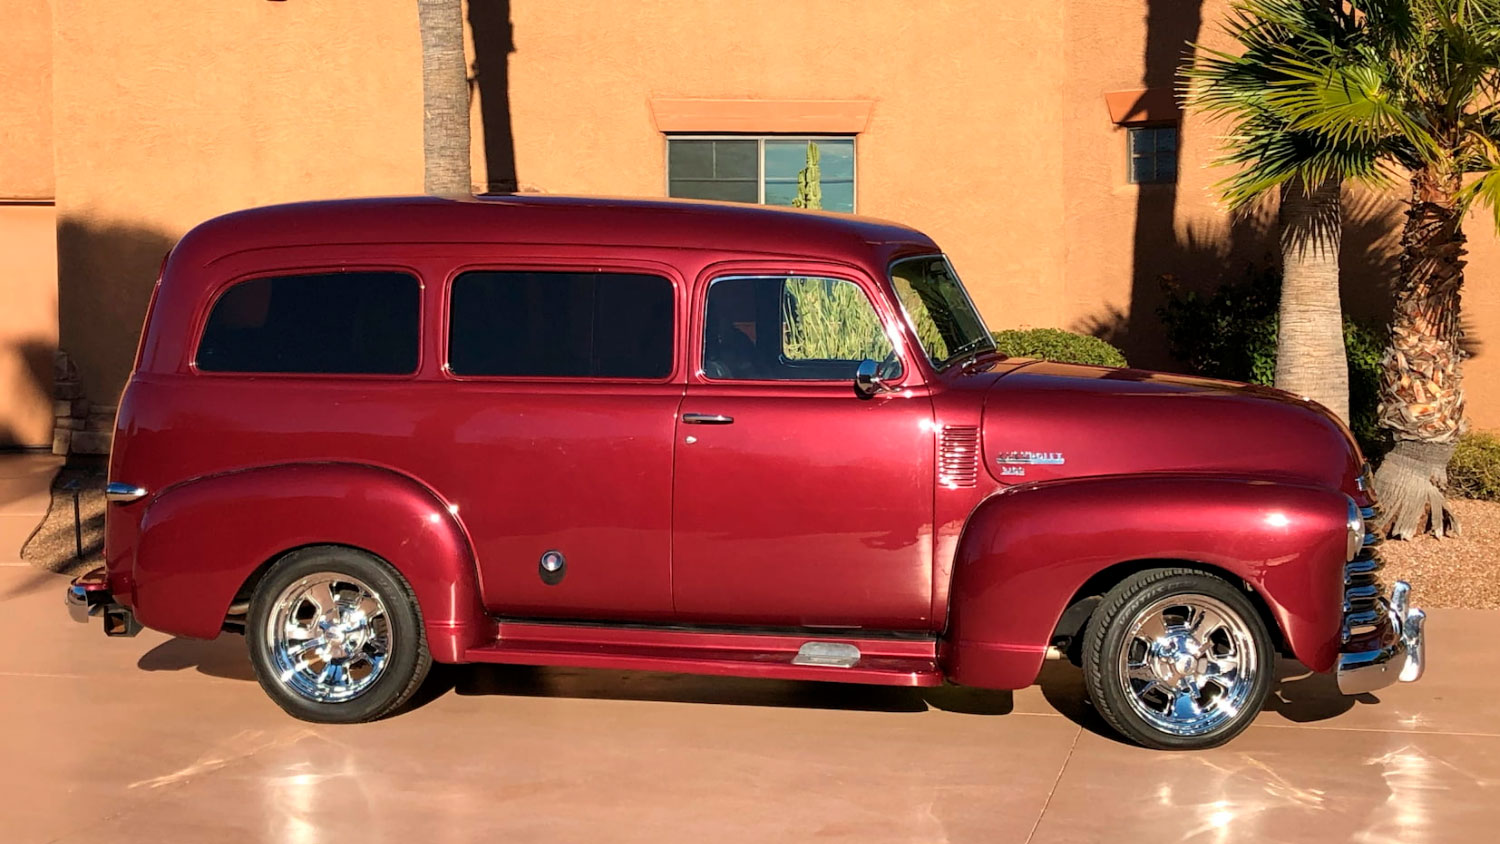 1948 gmc suburban clamshell for Sale in East Los Angeles, CA